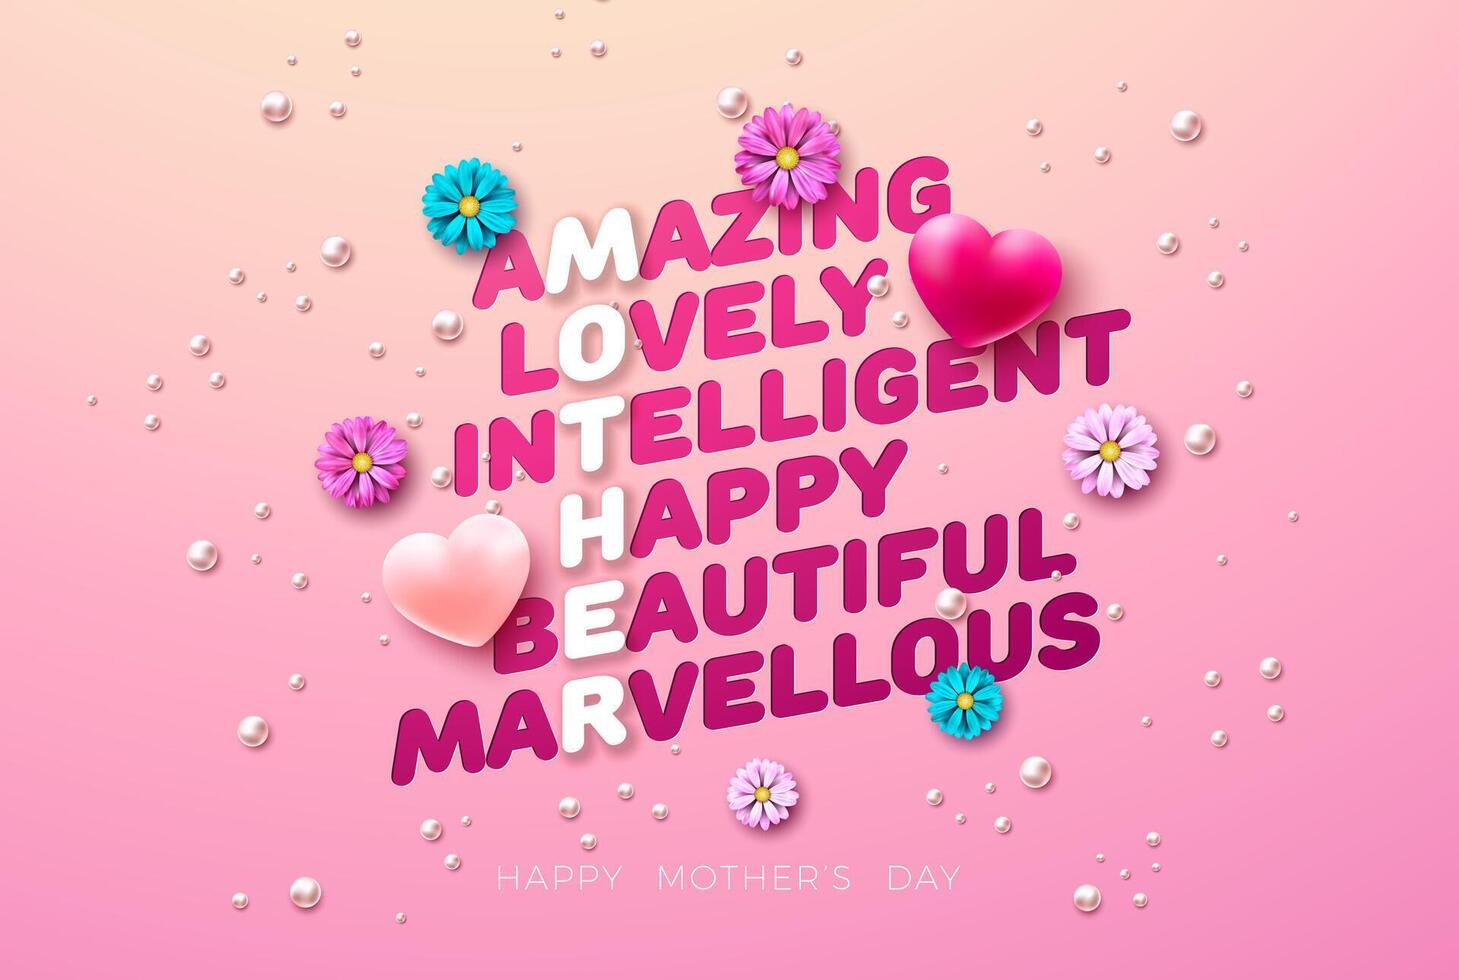 Happy Mother's Day Greeting Card Design with Hearts and Colorful Flowers on Pink Background. Mothers Day Illustration for Banner, Postcard, Flyer, Invitation, Brochure, Poster. vector